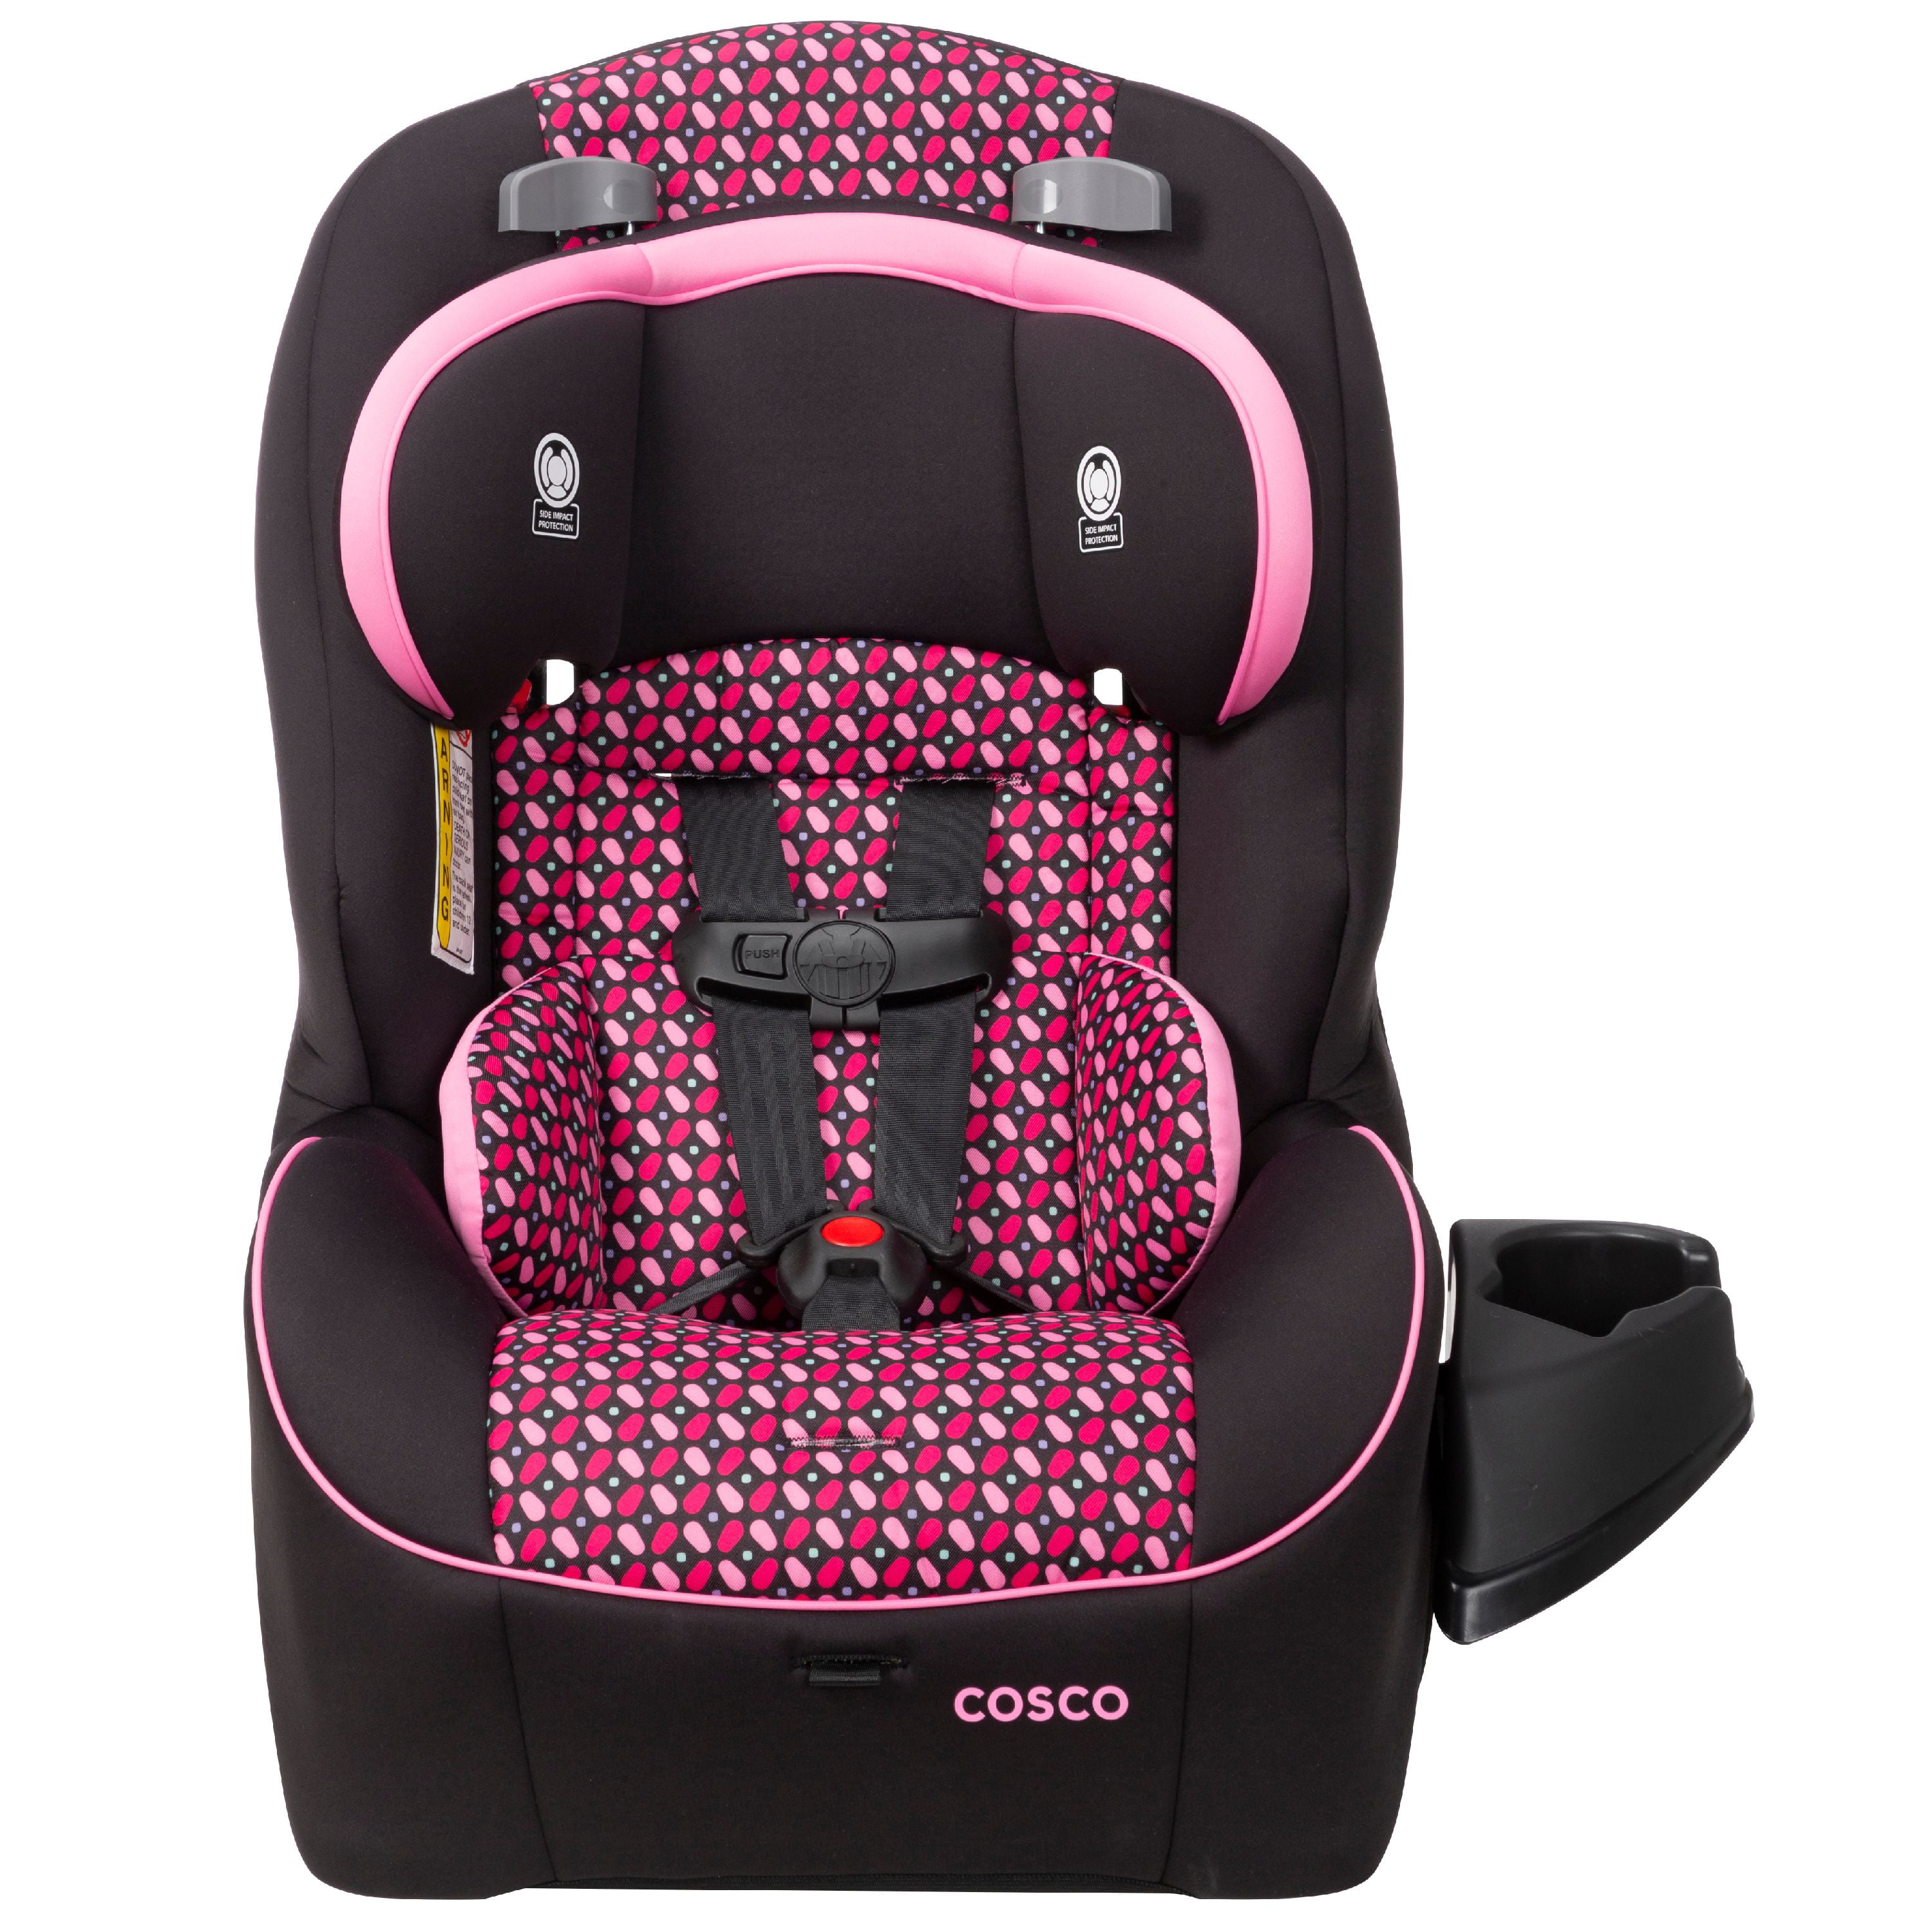 Walmart Convertible Car Seat A Comprehensive Review and Buyer's Guide